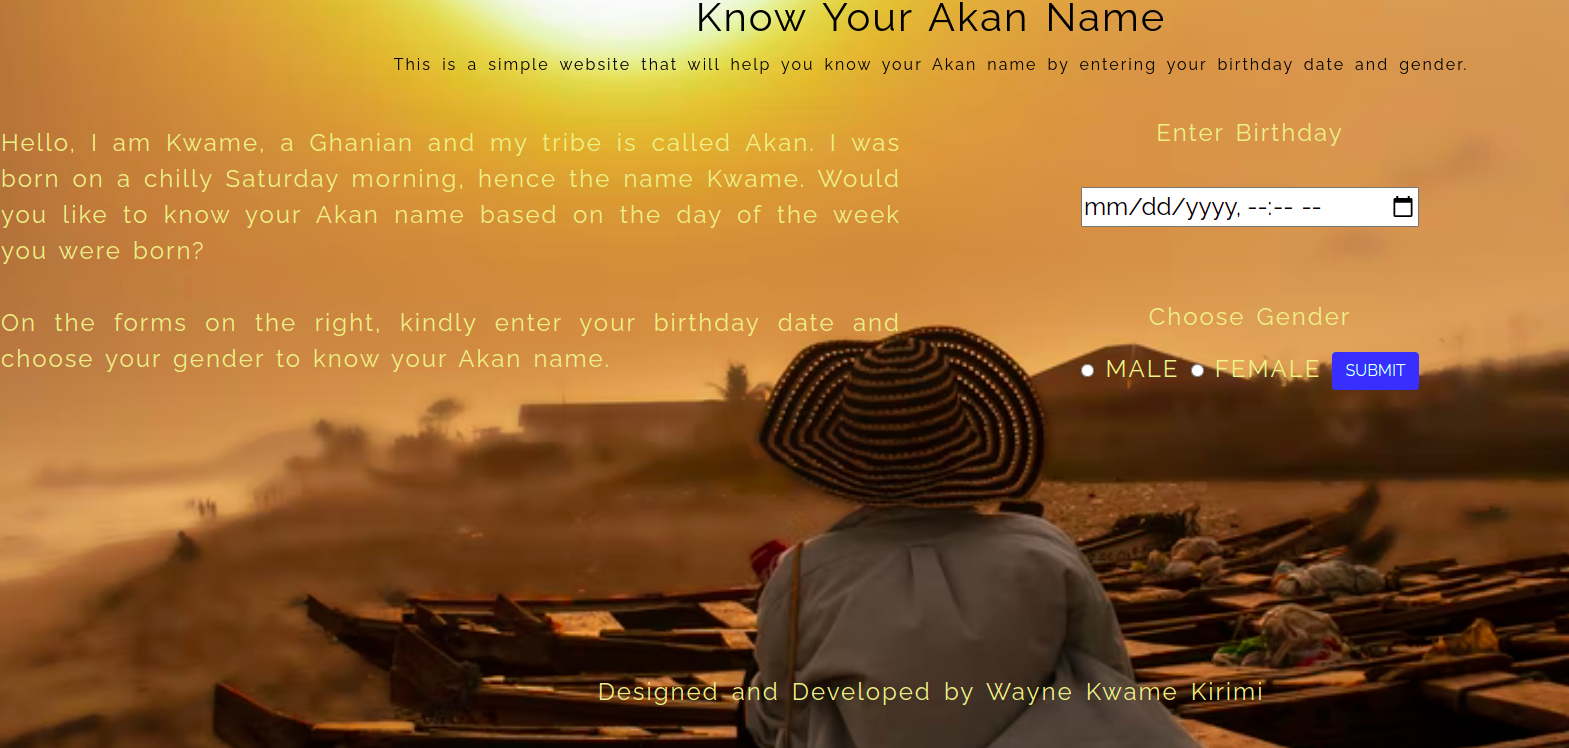 Know your Akan name